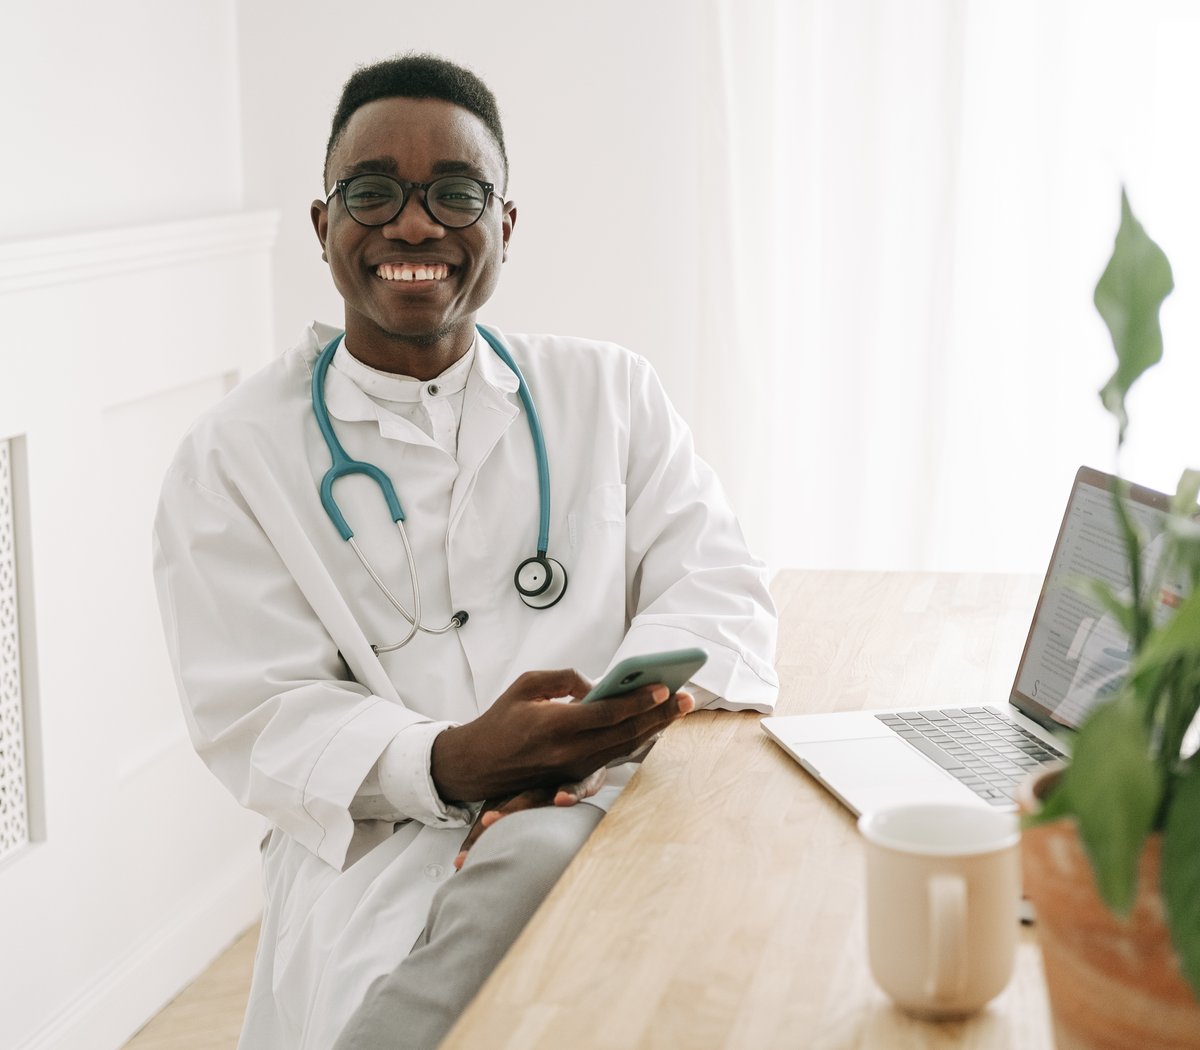 7 healthcare tools and templates for better patient engagement.